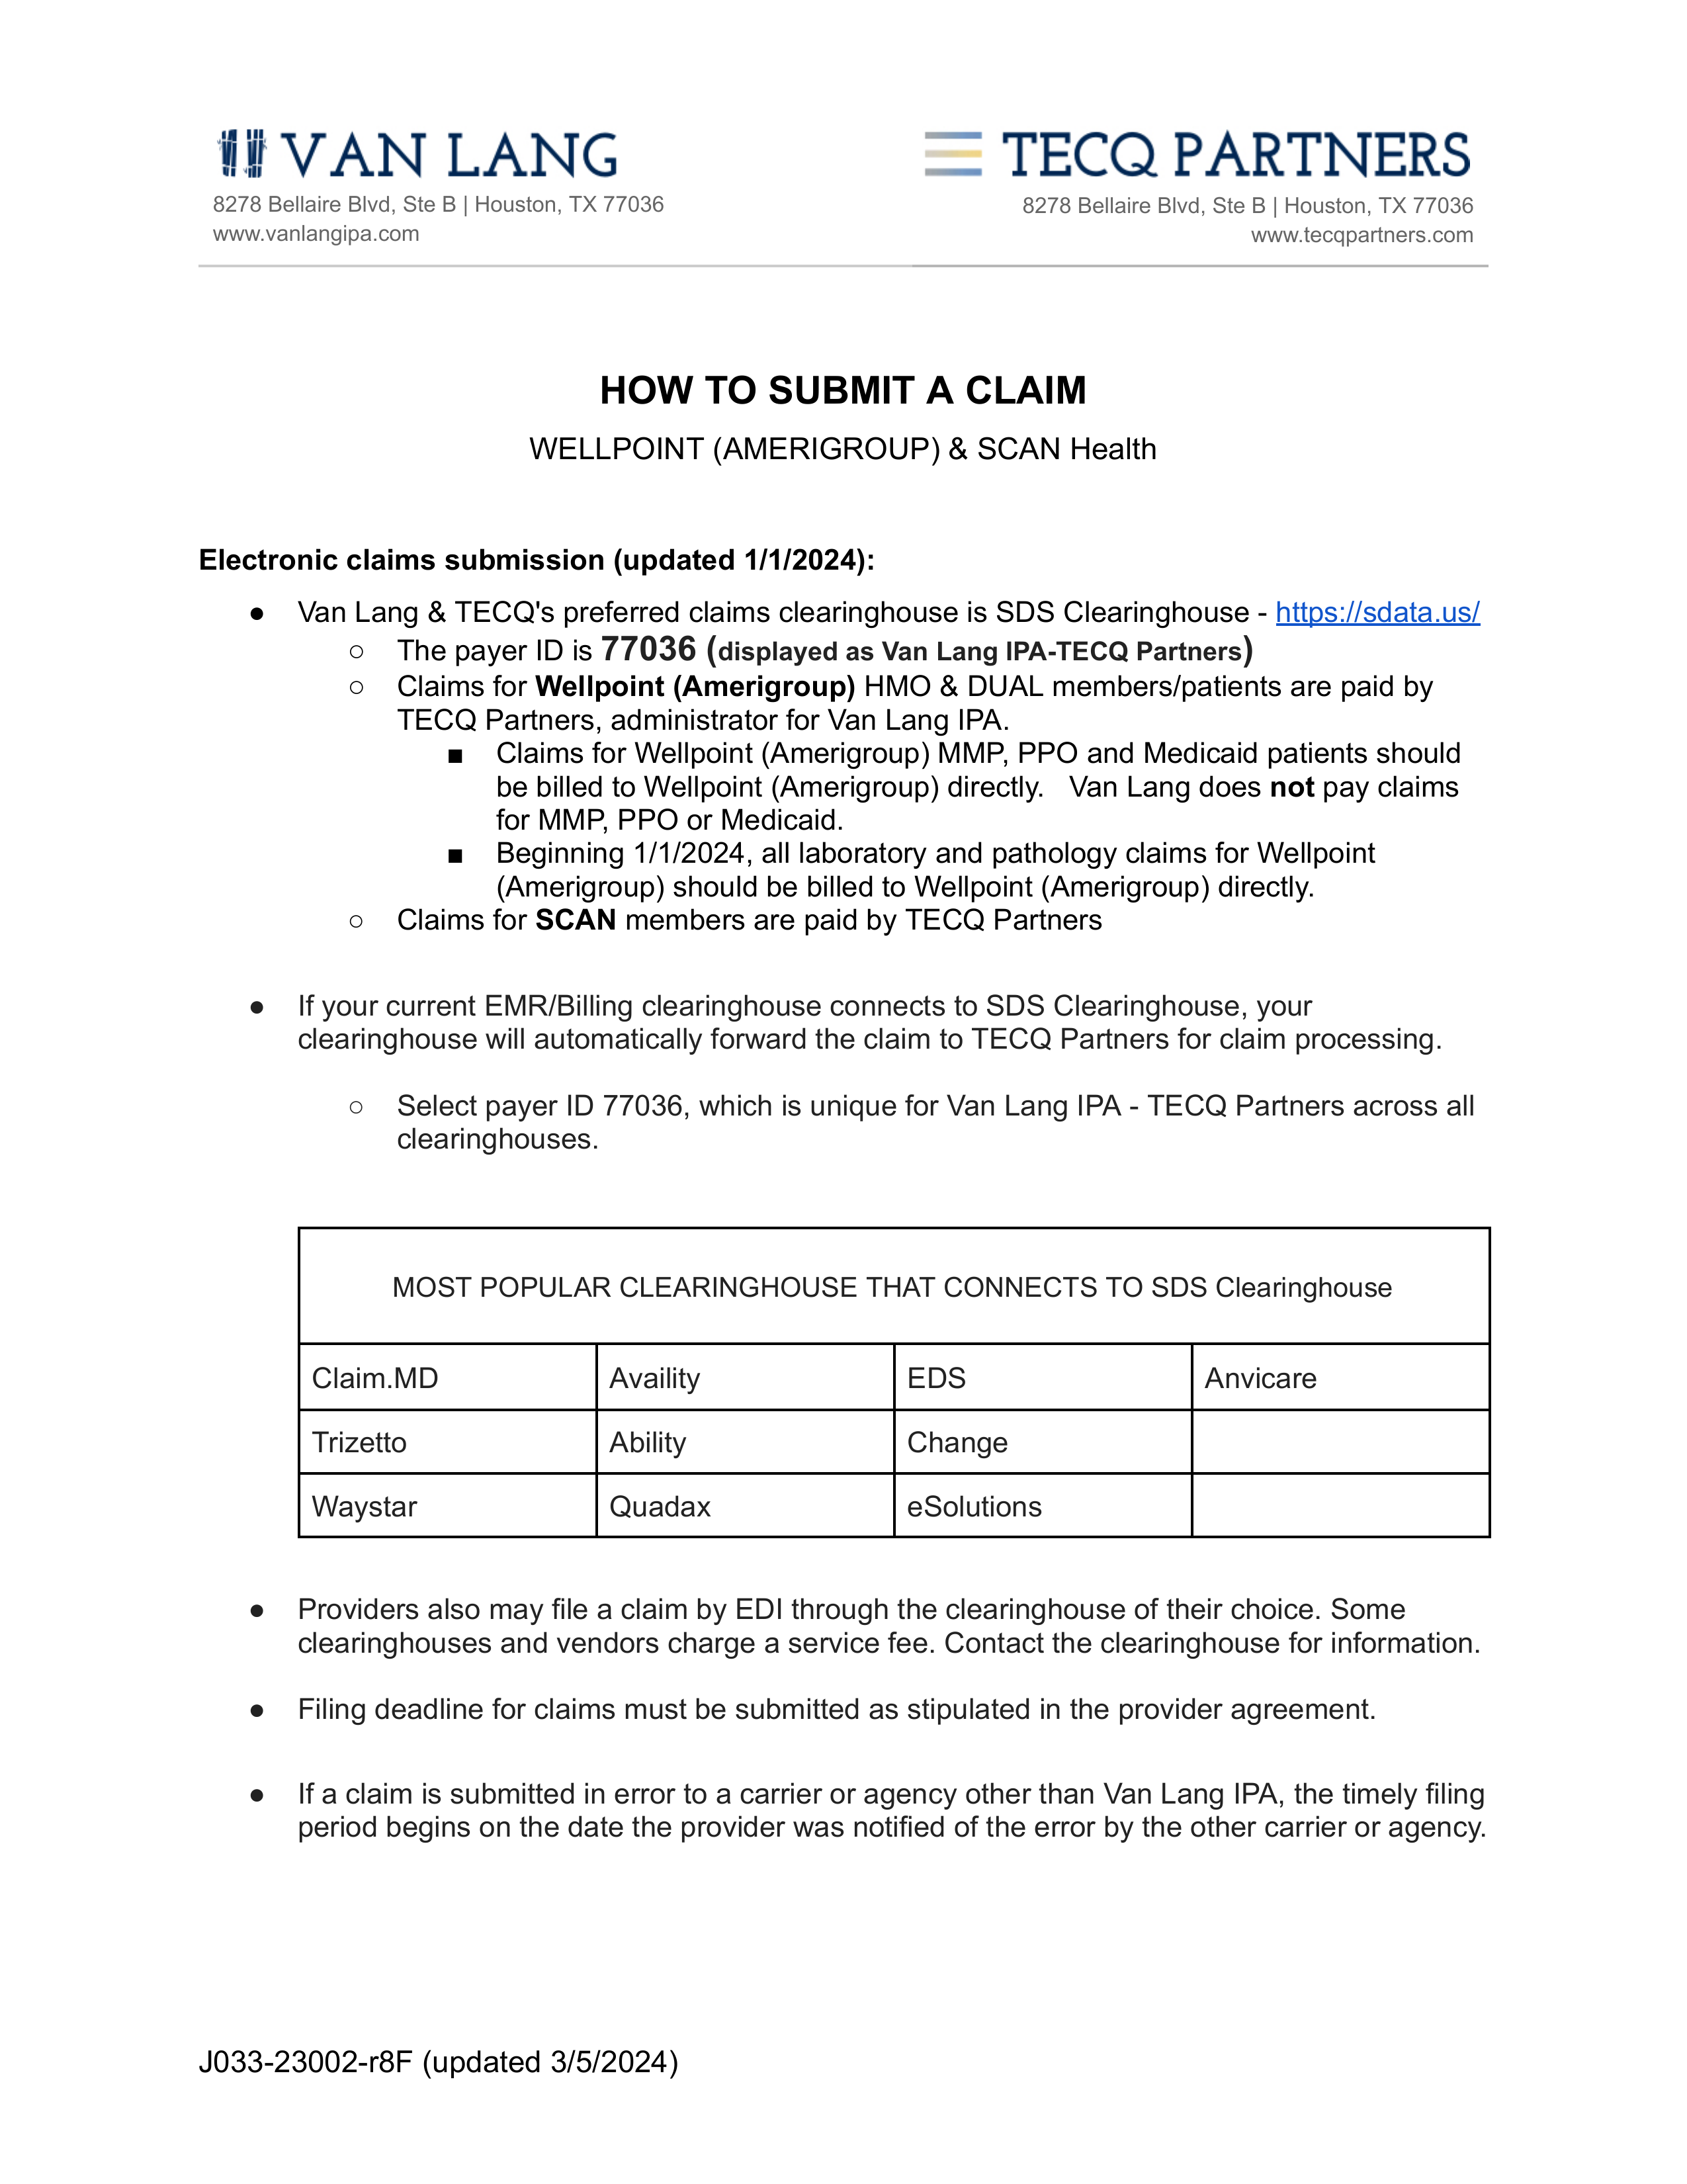 How to Submit A Claim 1